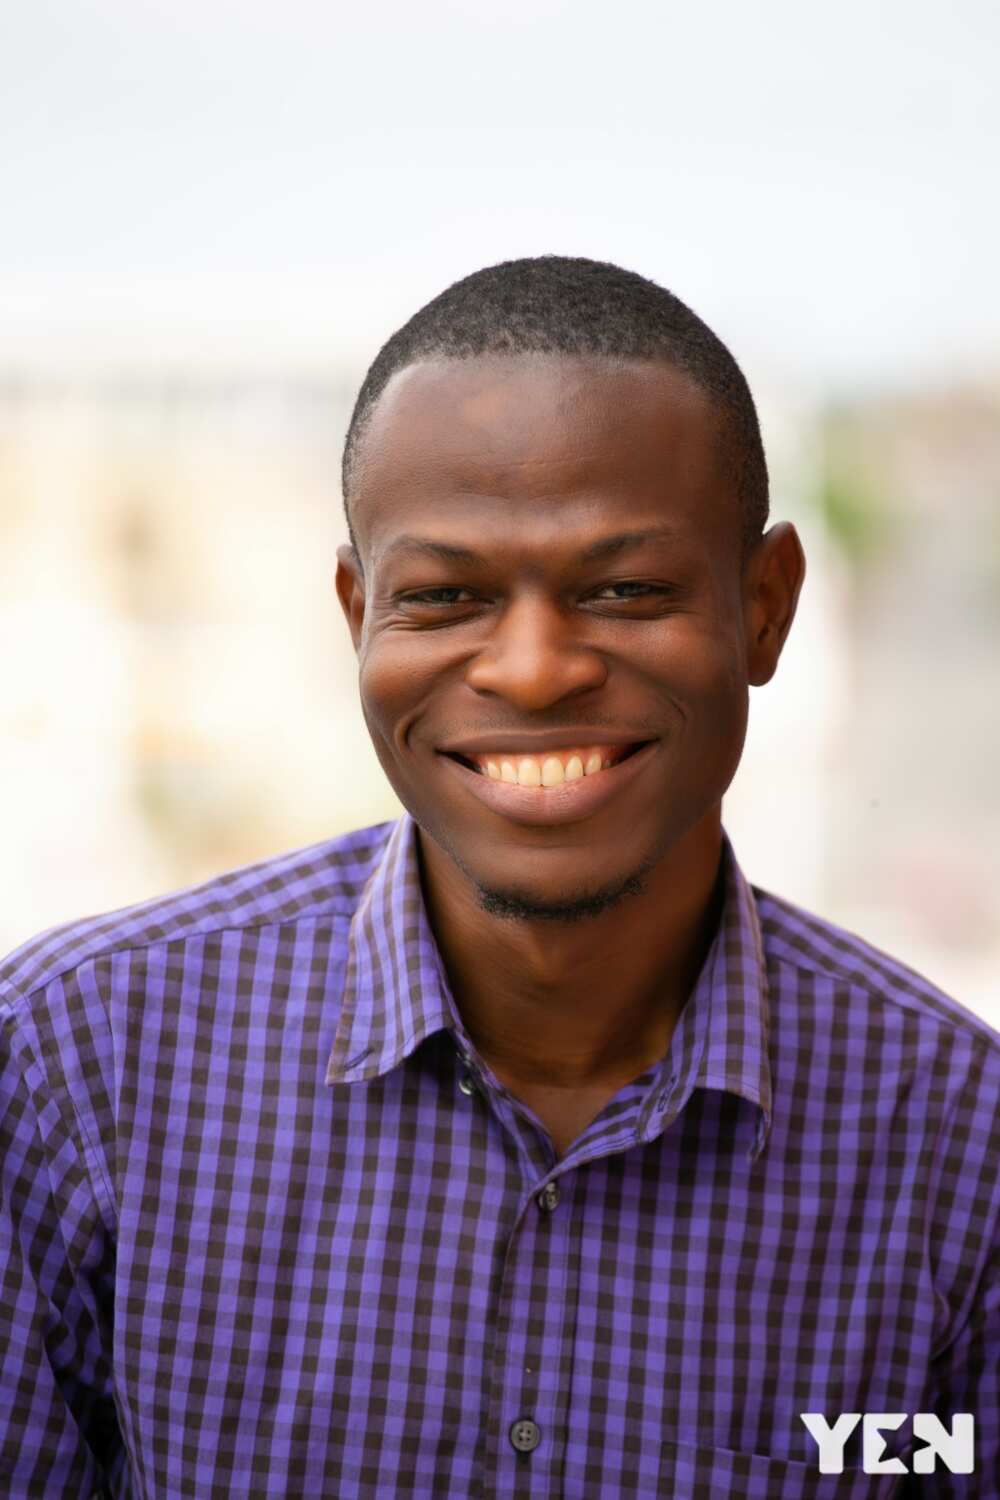 Meet Samuel Obour, Naa Ayeley and the other creative minds at YEN.com.gh